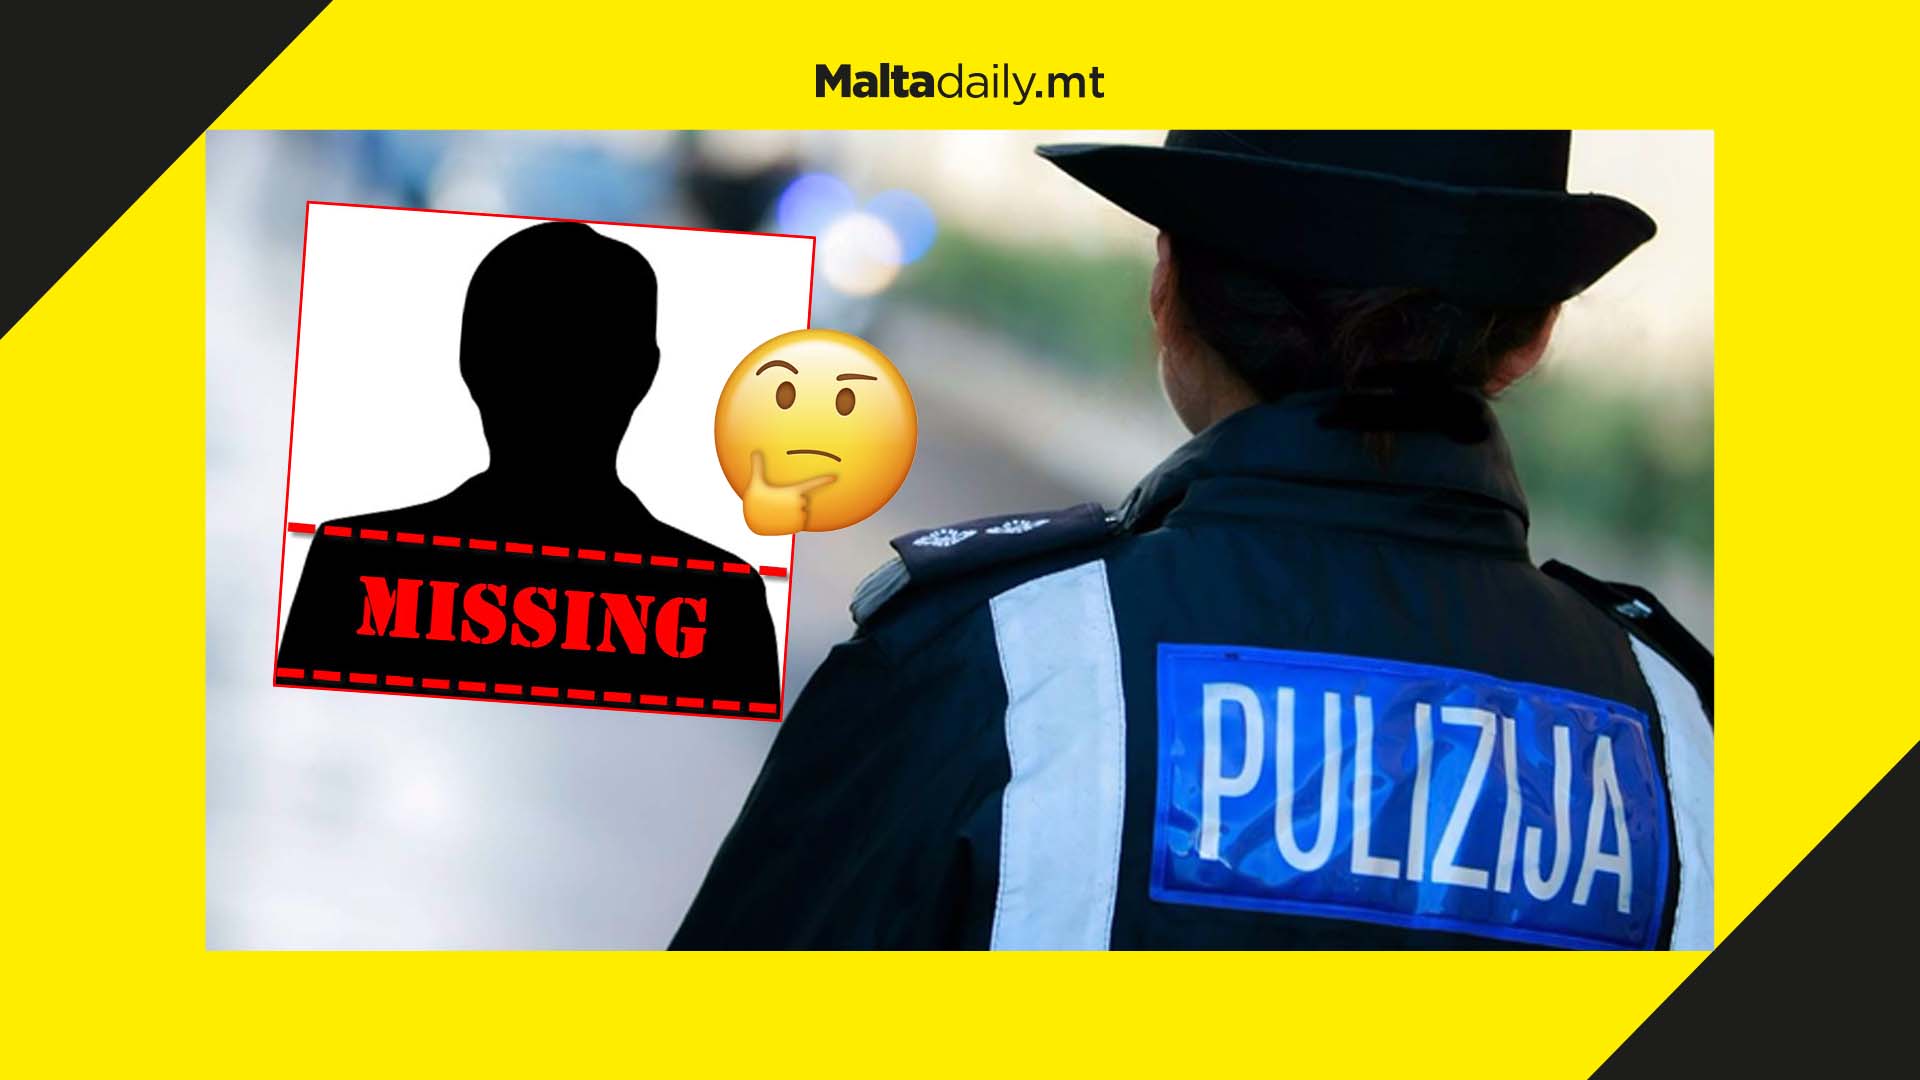 700 people reported missing last year in Malta